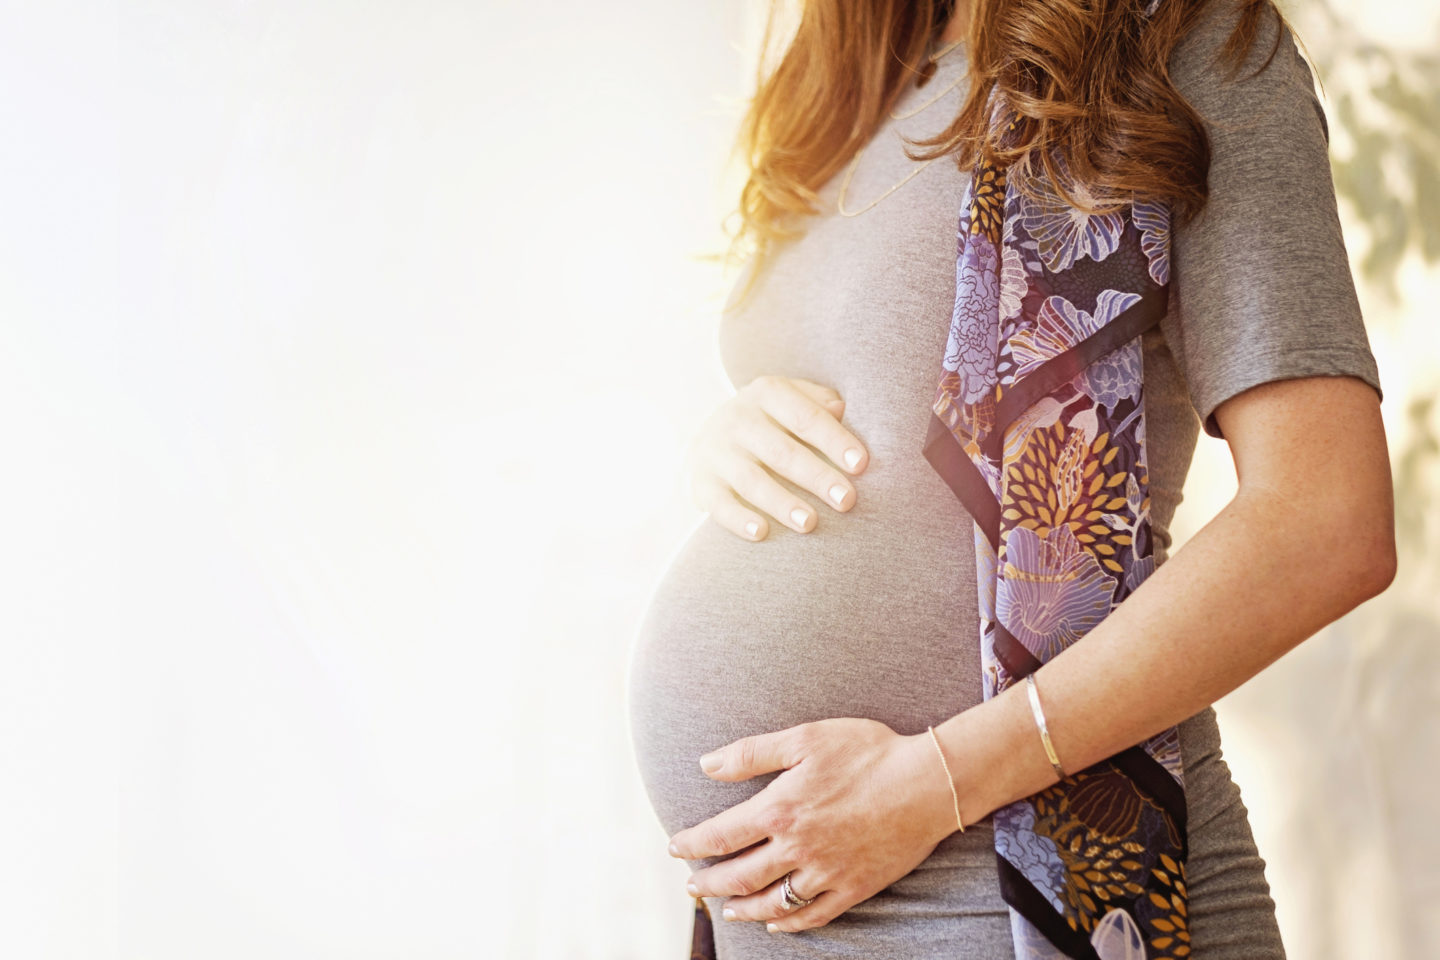 Experts Say More Research Would Be Needed To Confidently Link Herpes During Pregnancy To Autism